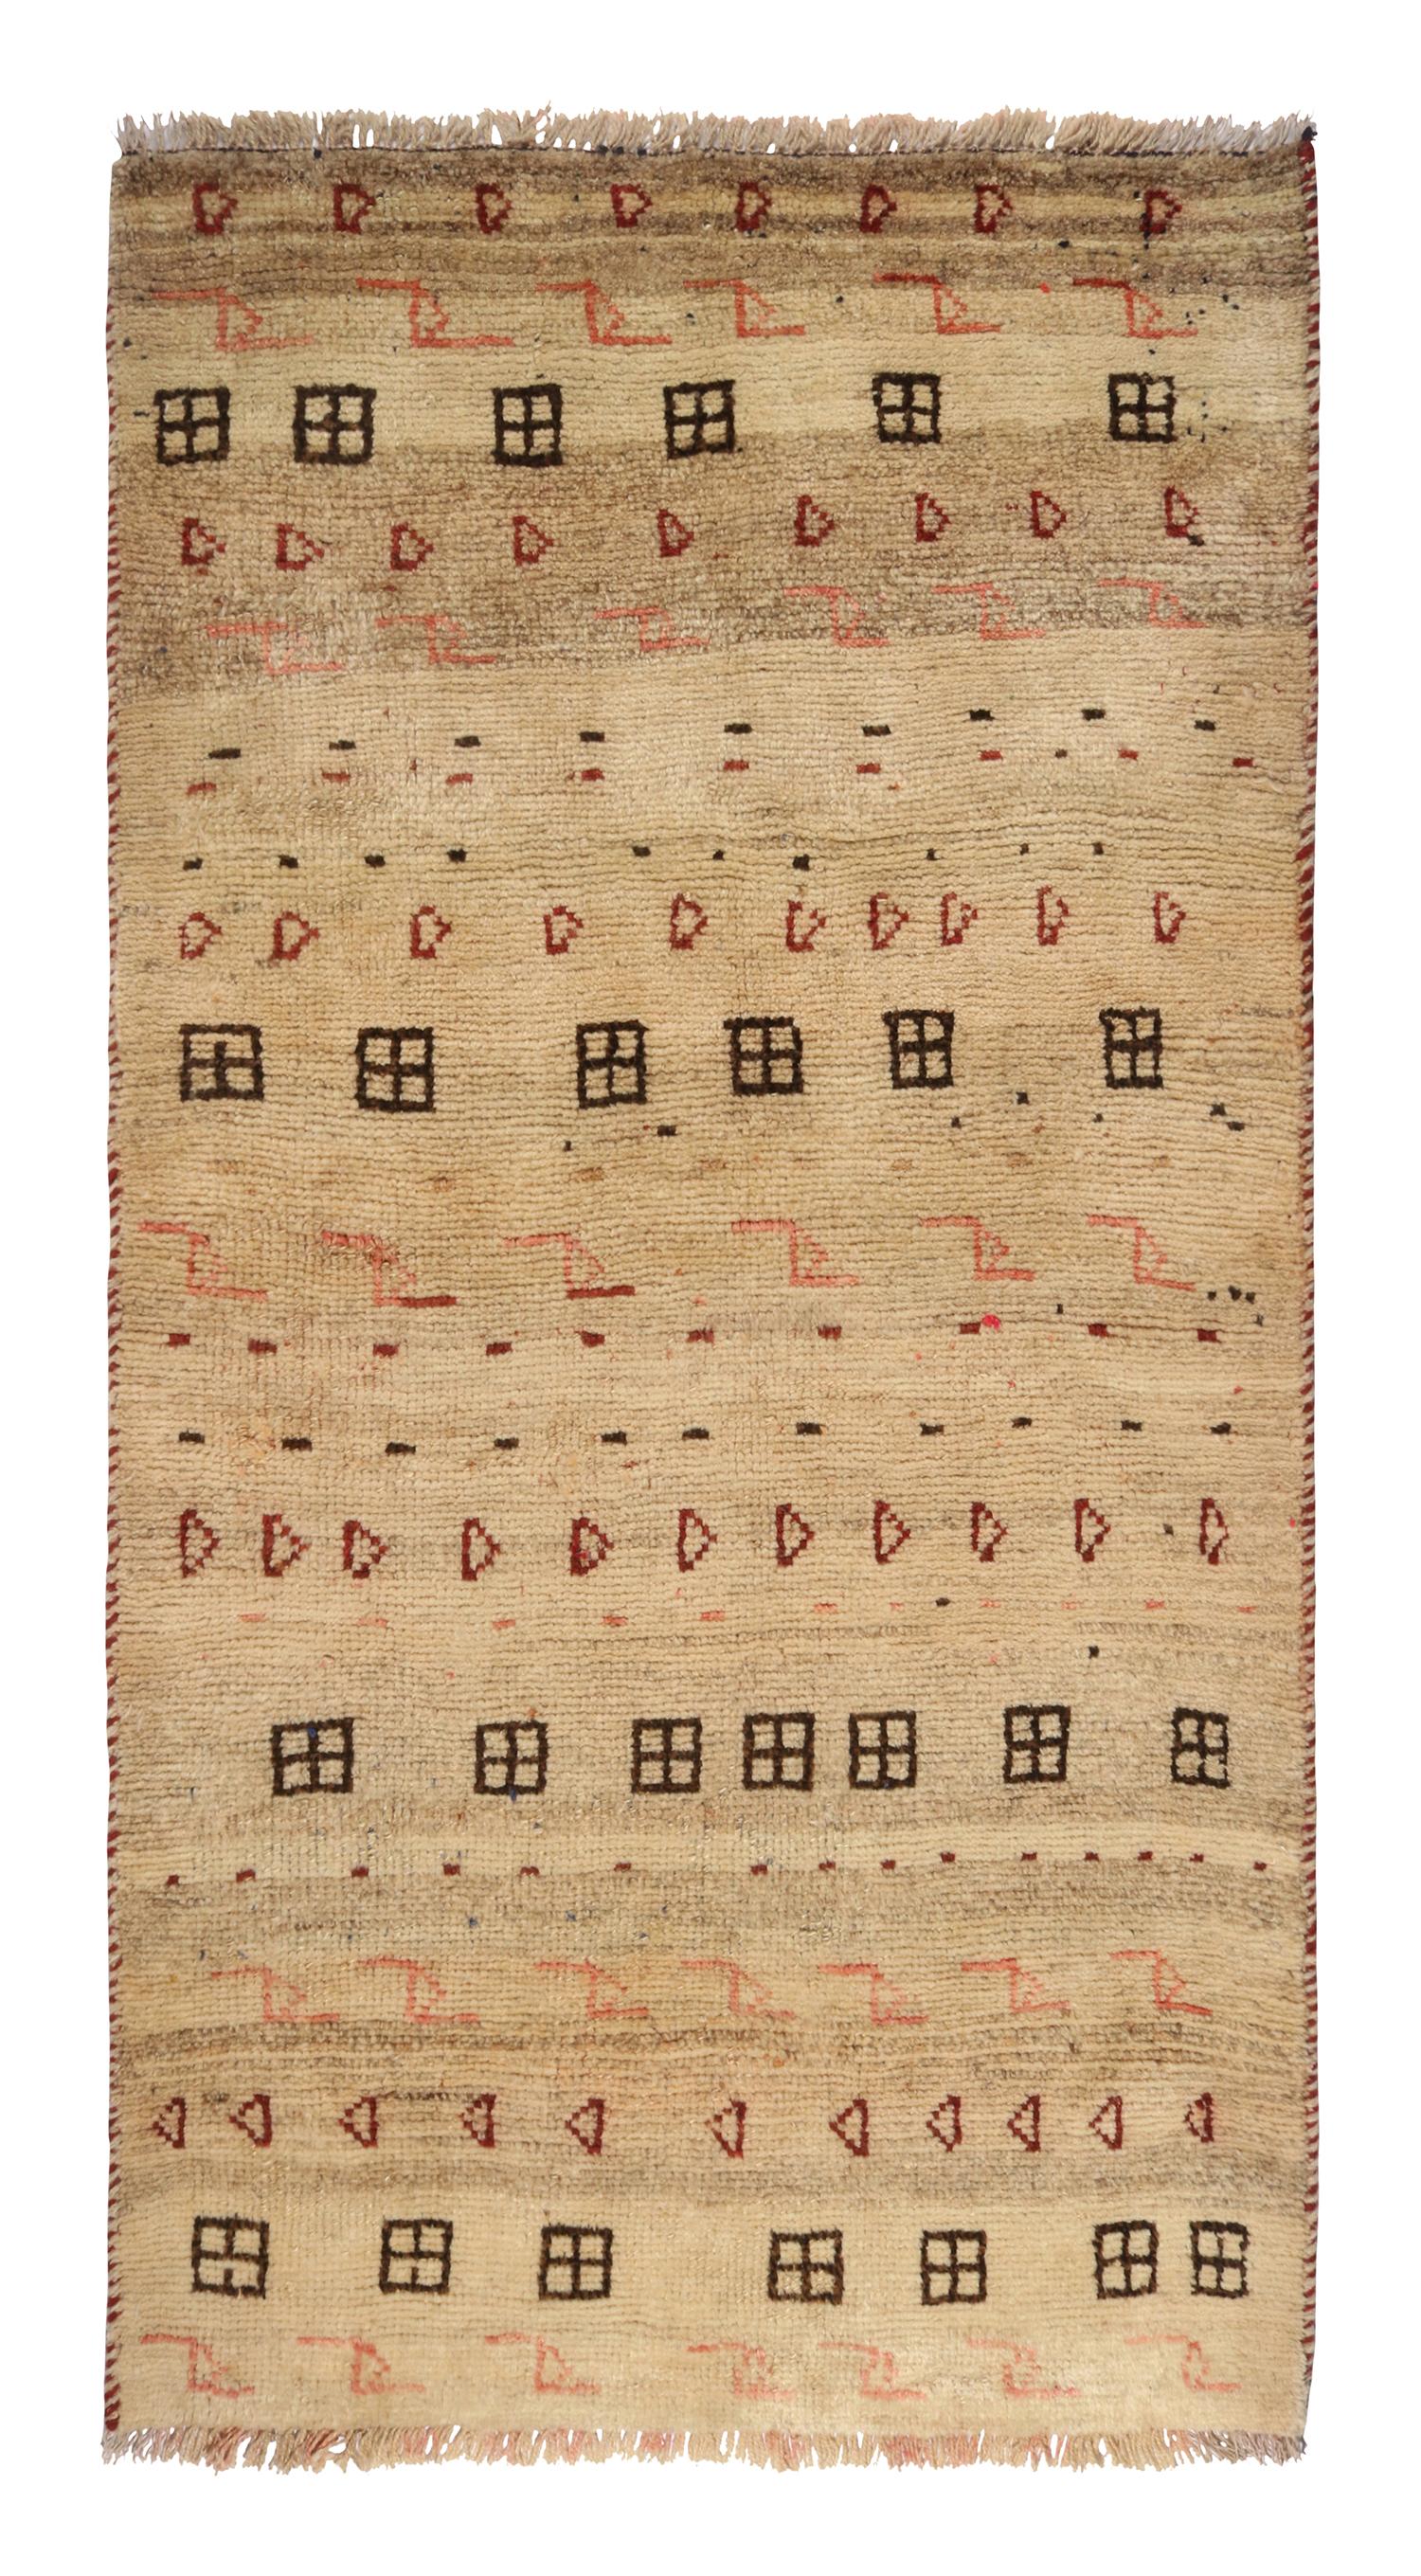 This vintage 3x5 Gabbeh Persian rug is from the latest entries in Rug & Kilim’s rare tribal curations. Hand-knotted in wool circa 1950-1960.

On the Design: 
This tribal provenance is one of the most primitive, and collectible shabby-chic styles